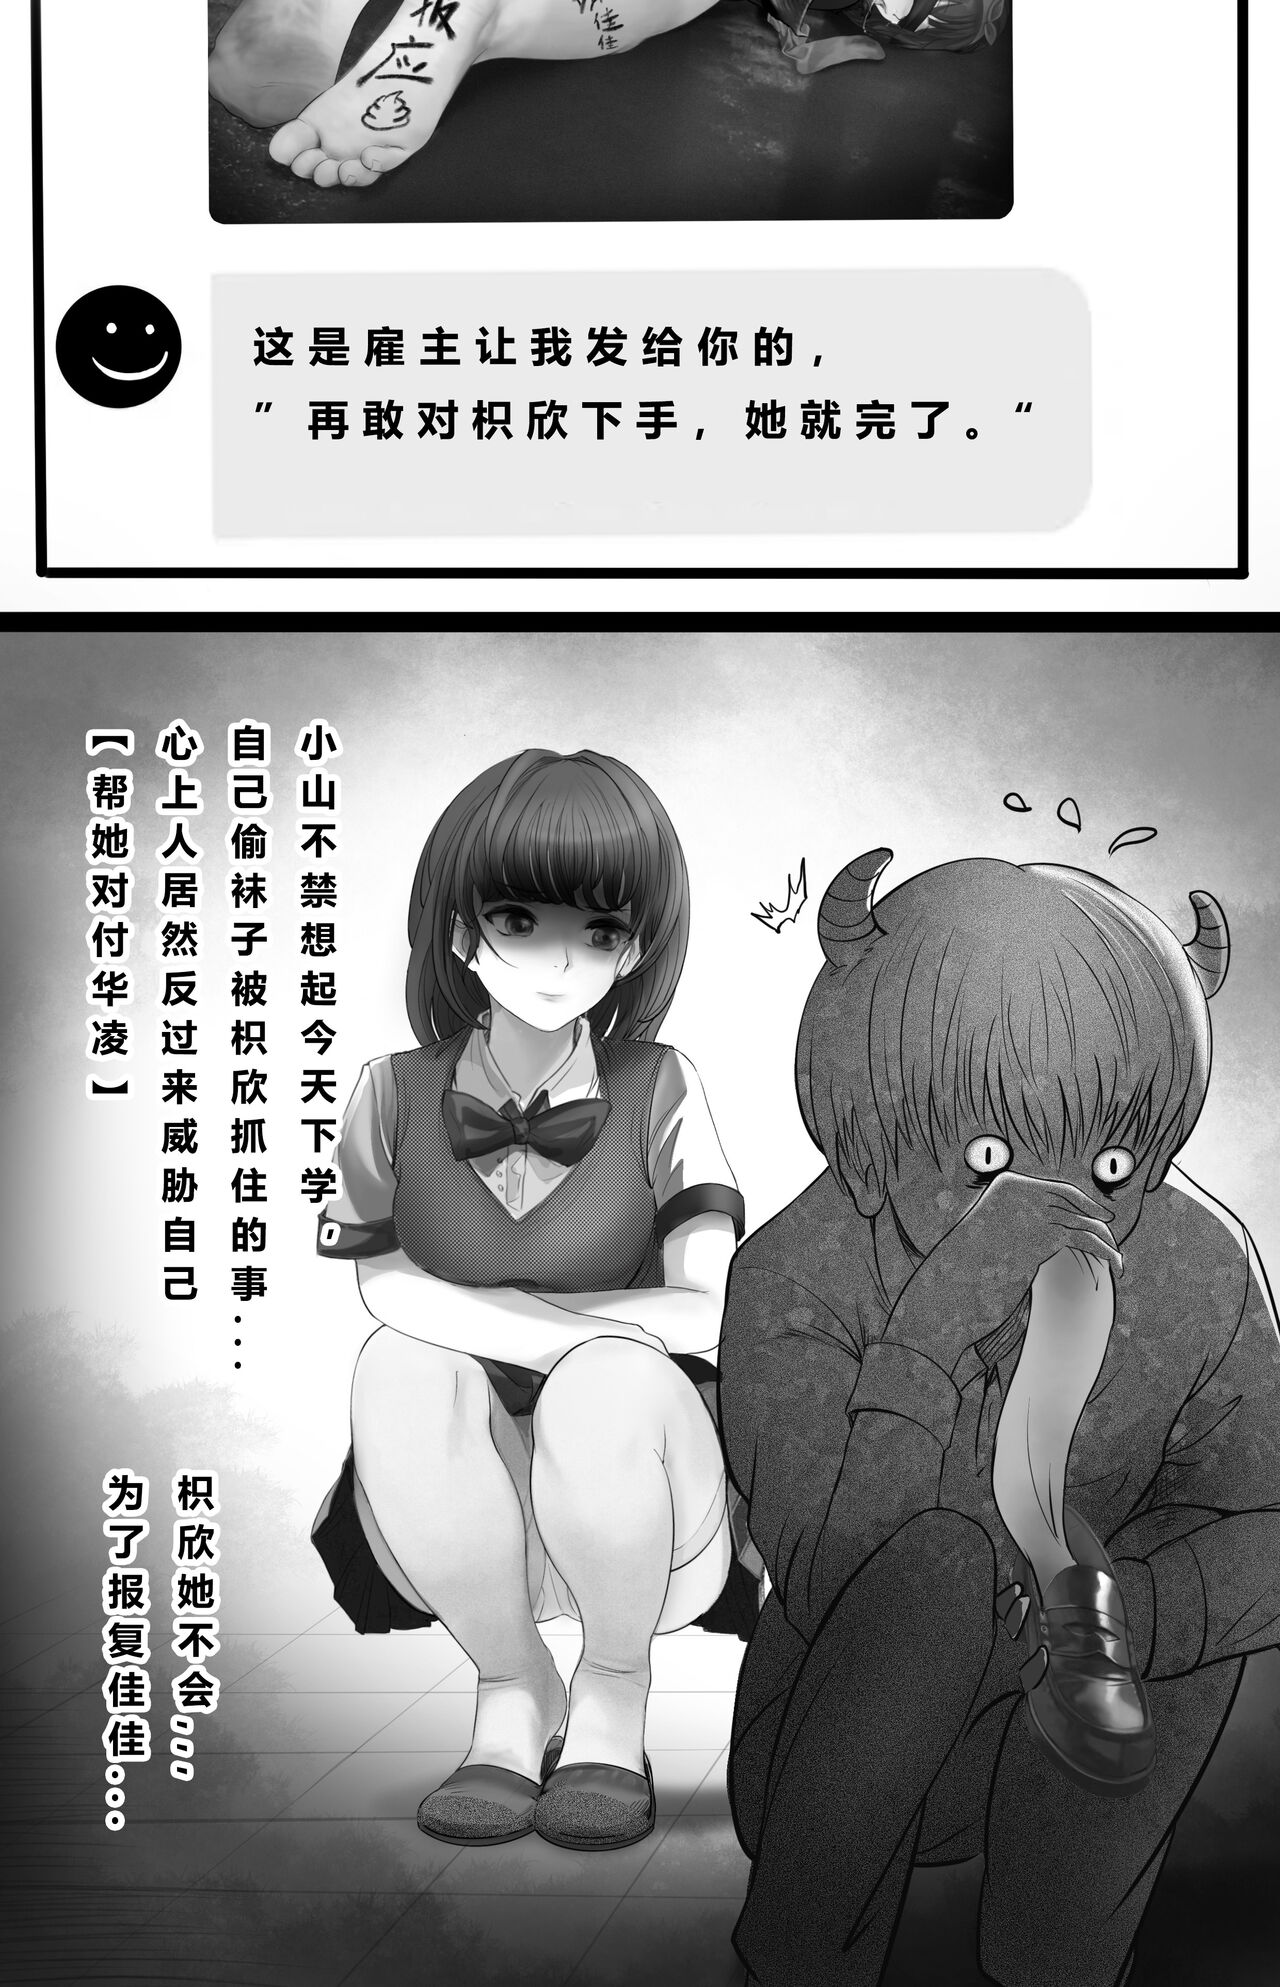 [Minworld] GOAT-goat Ⅴ special chapter (2) [CHINESE] 